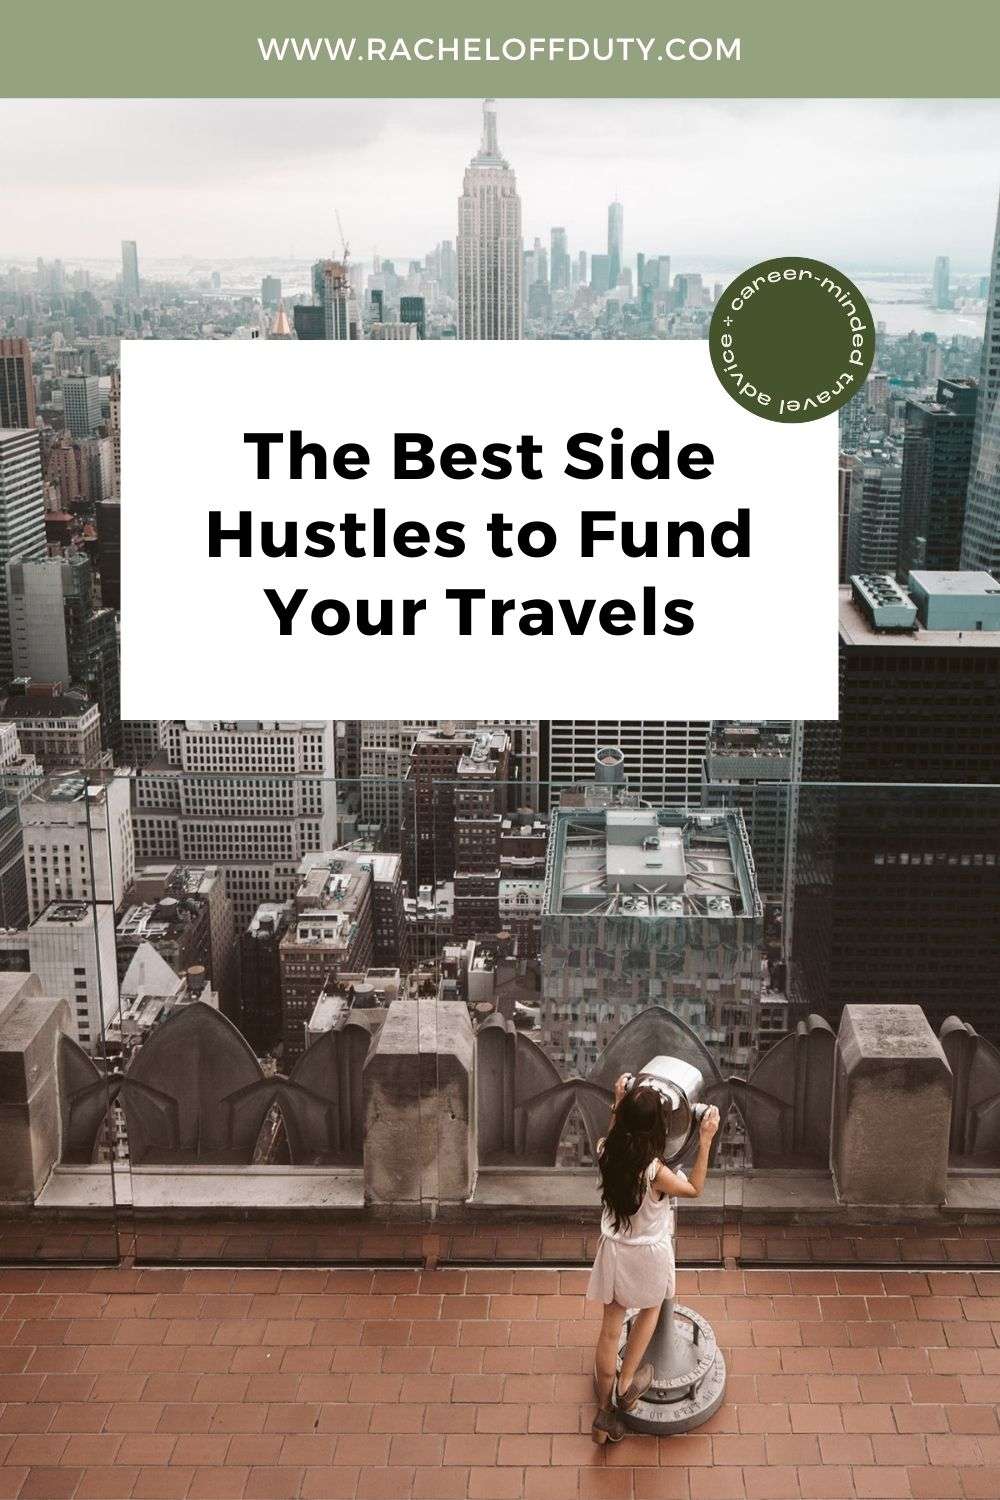 Rachel Off Duty: The Best Travel Side Hustles to Fund Your Adventures